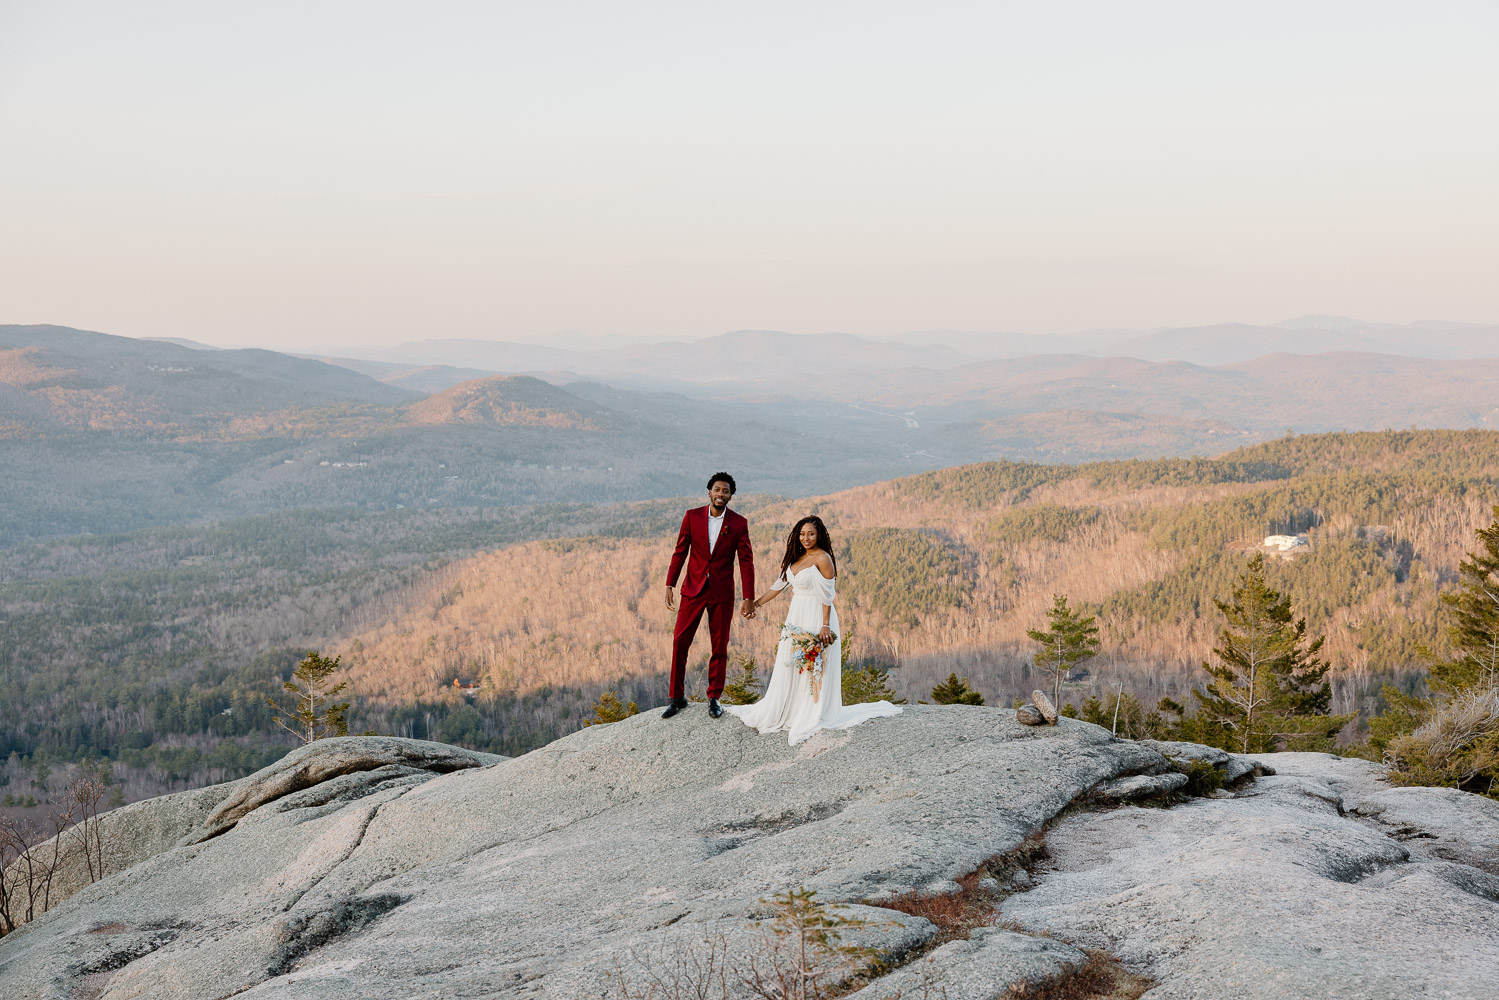 Intimate white mountain sunrise elopement in franconia notch